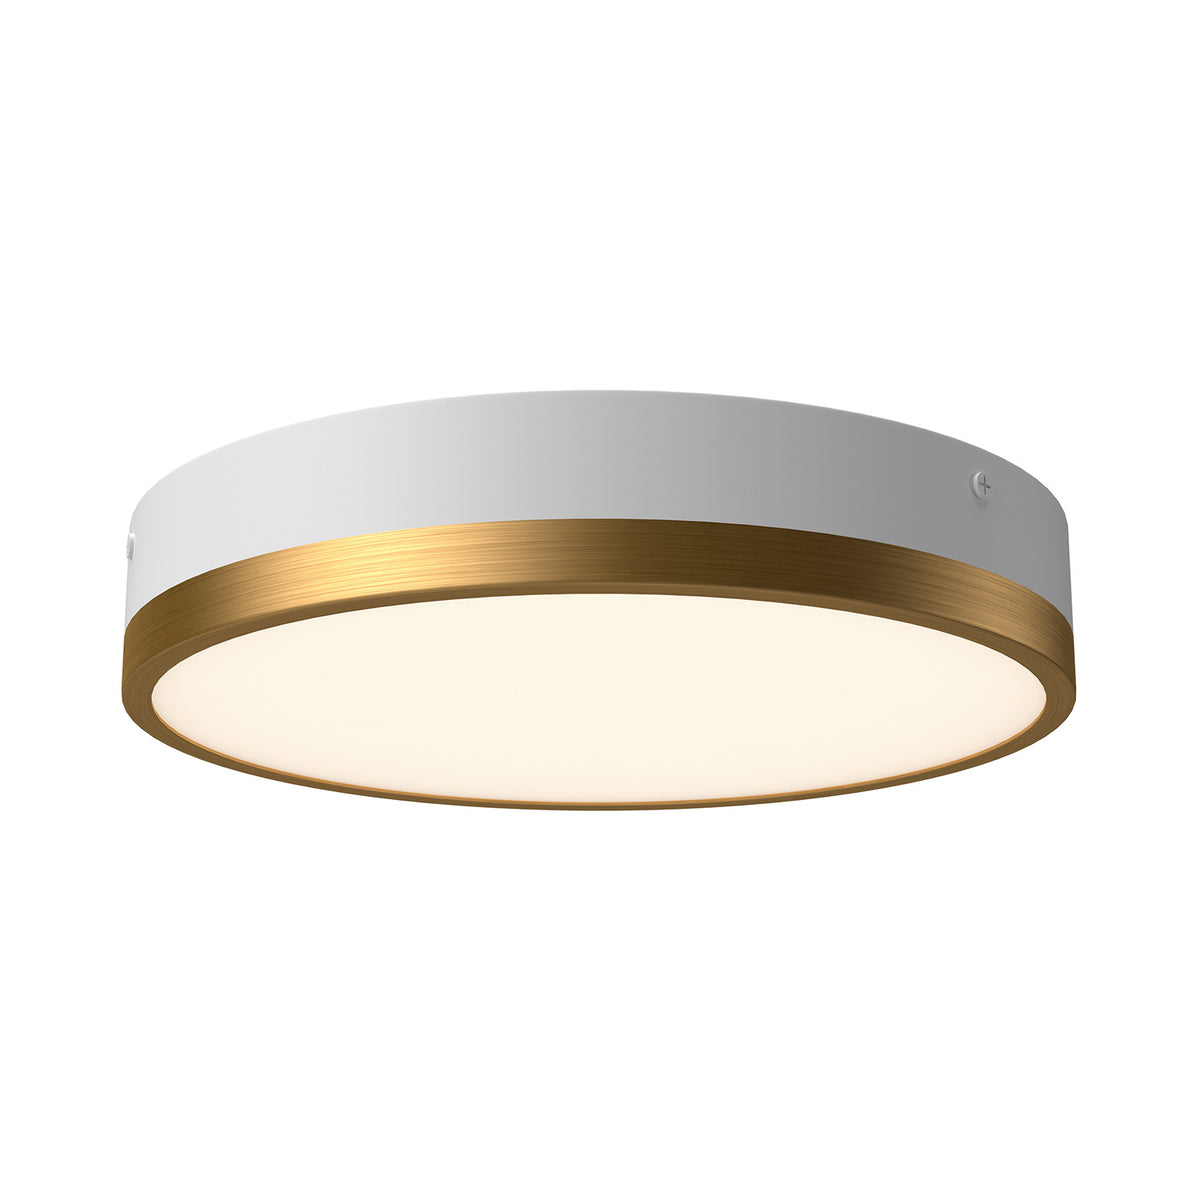 Alora LED Flush Mount from the Adelaide collection in Aged Gold/Matte Black|Aged Gold/White finish